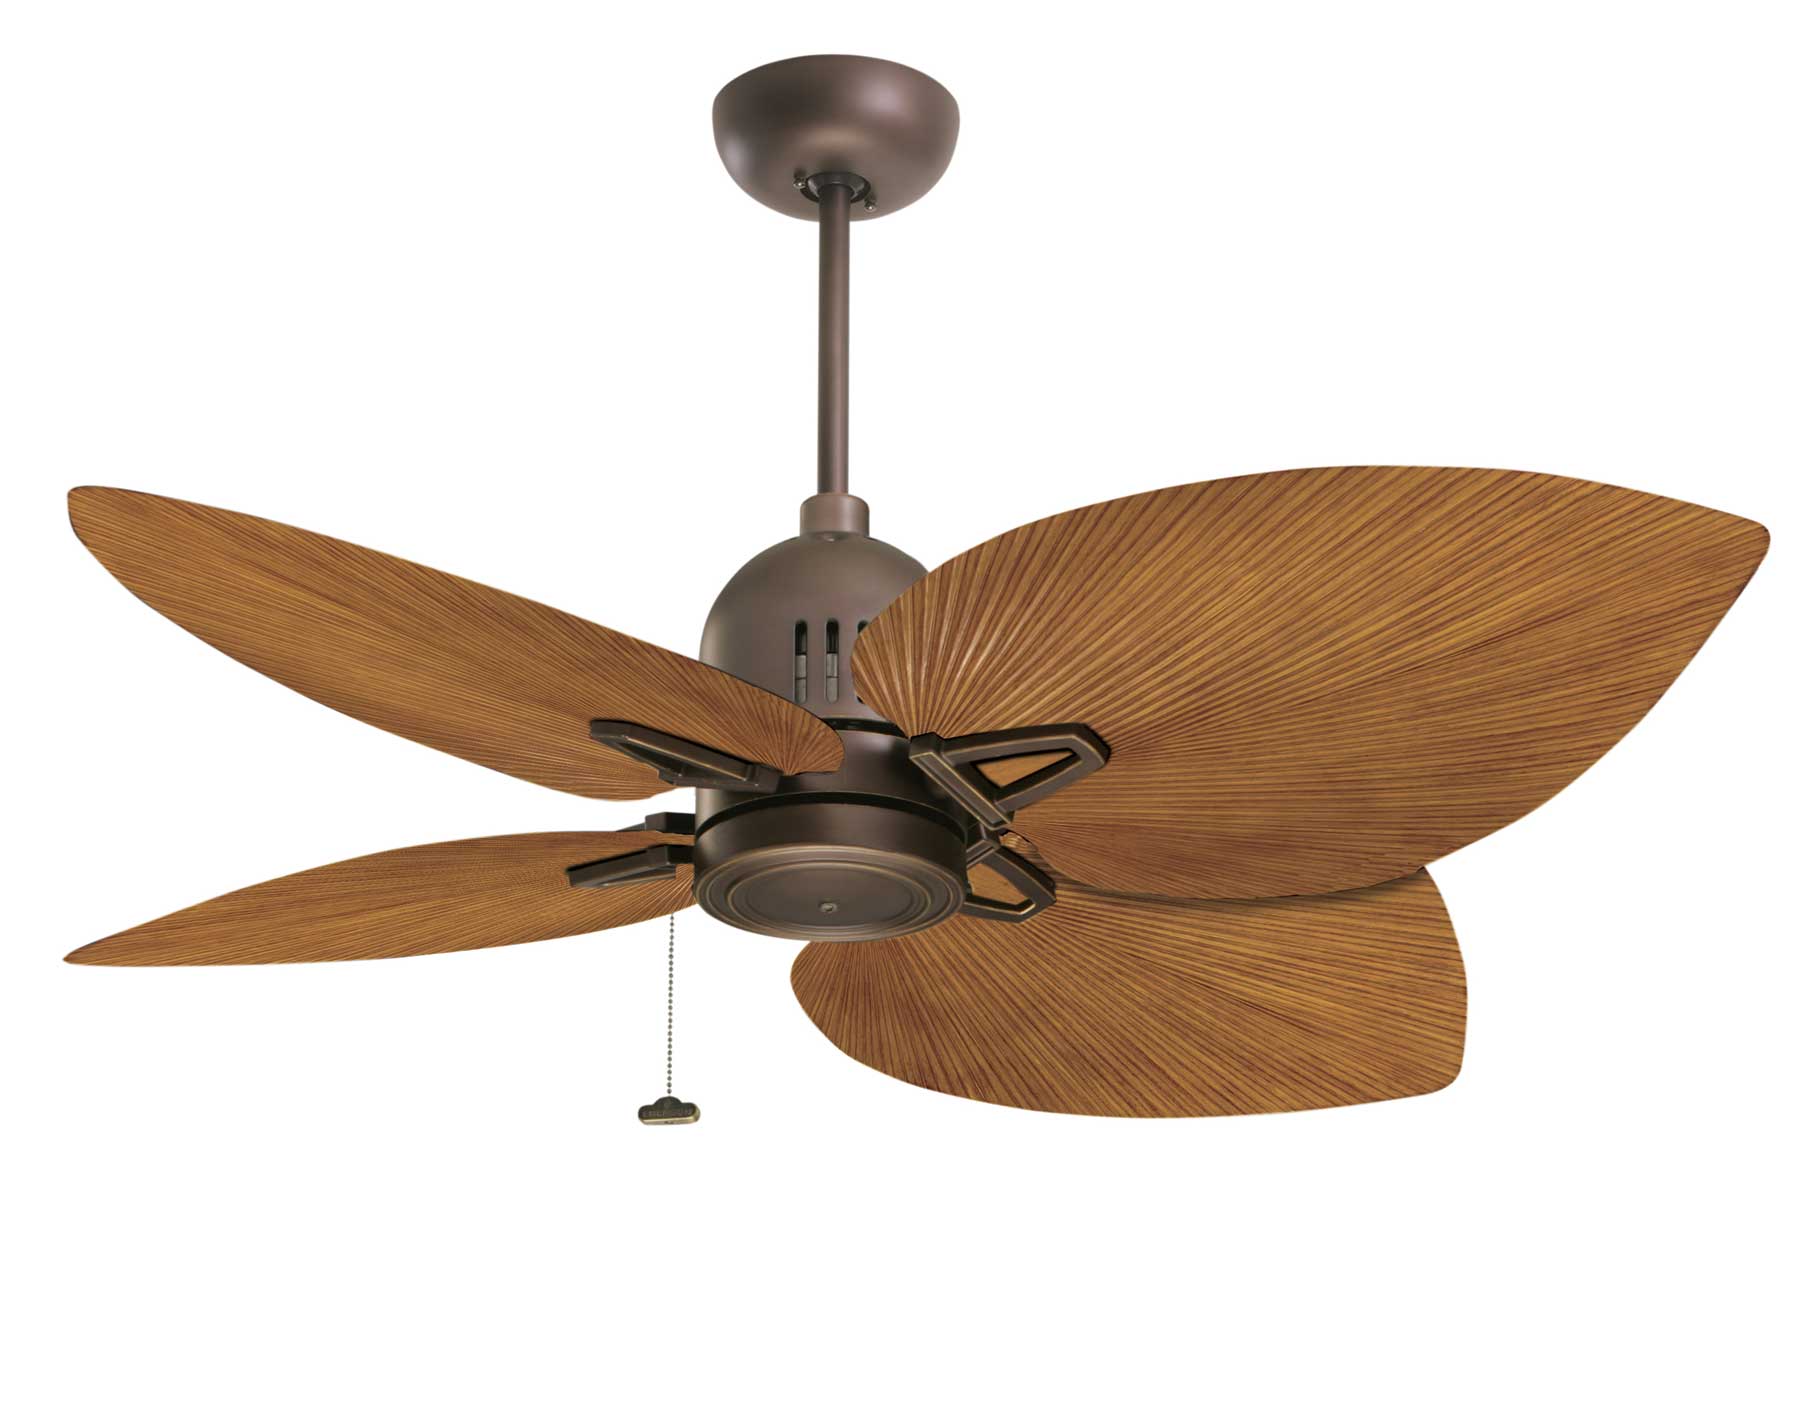 ... 203184026 in addition 204729878. on twin ceiling fans home depot